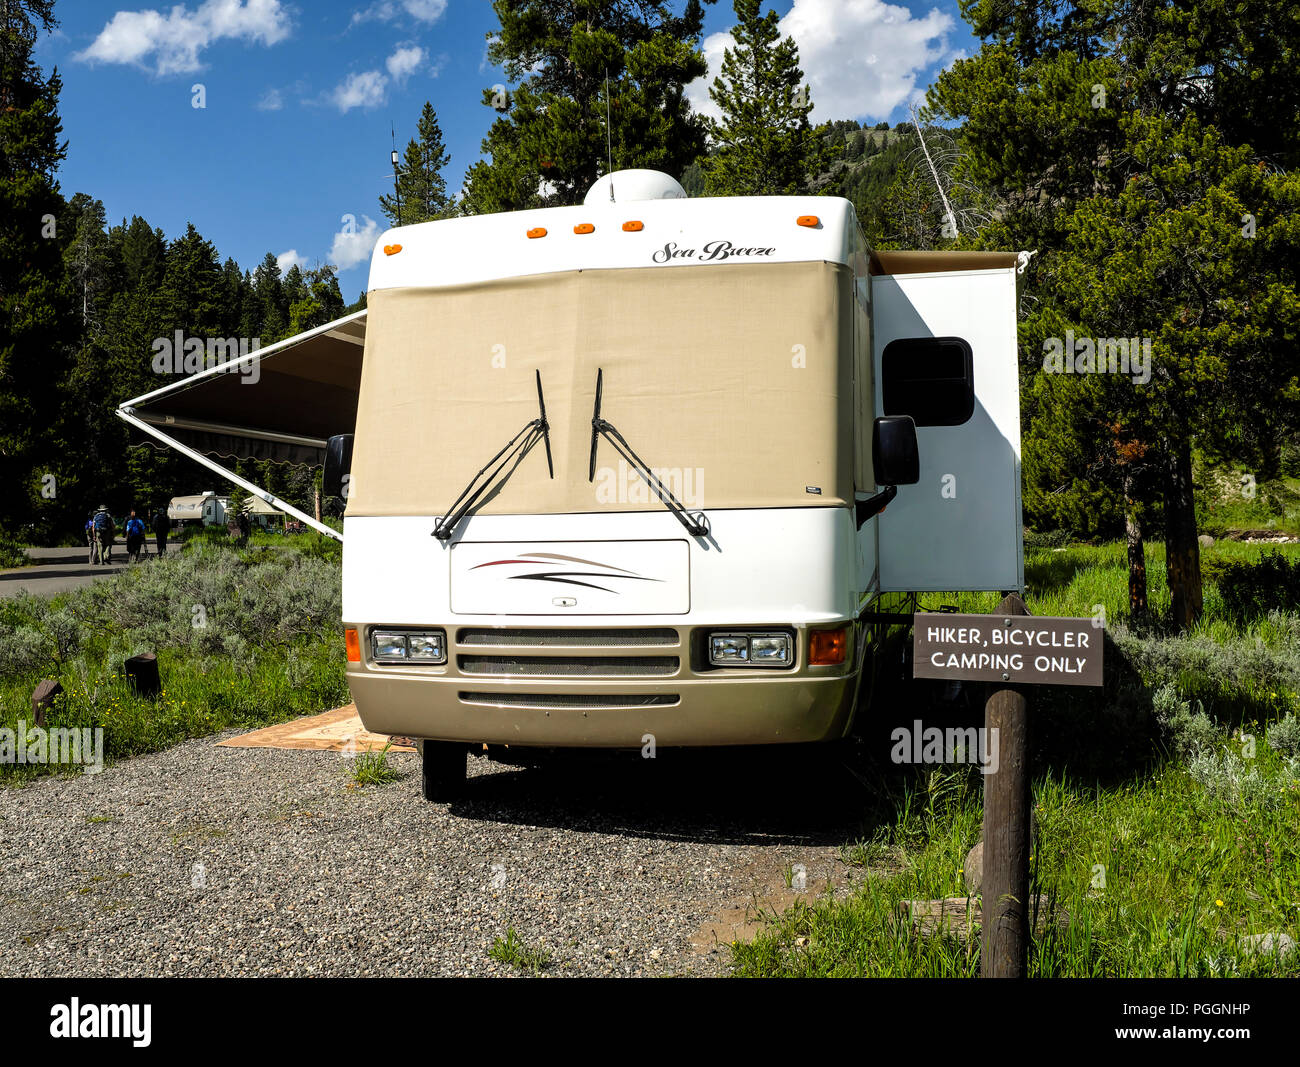 WY03306-00...WYOMING - Hiker Biker site at Pebble Creek Campground in Yellowstone National Park. Stock Photo